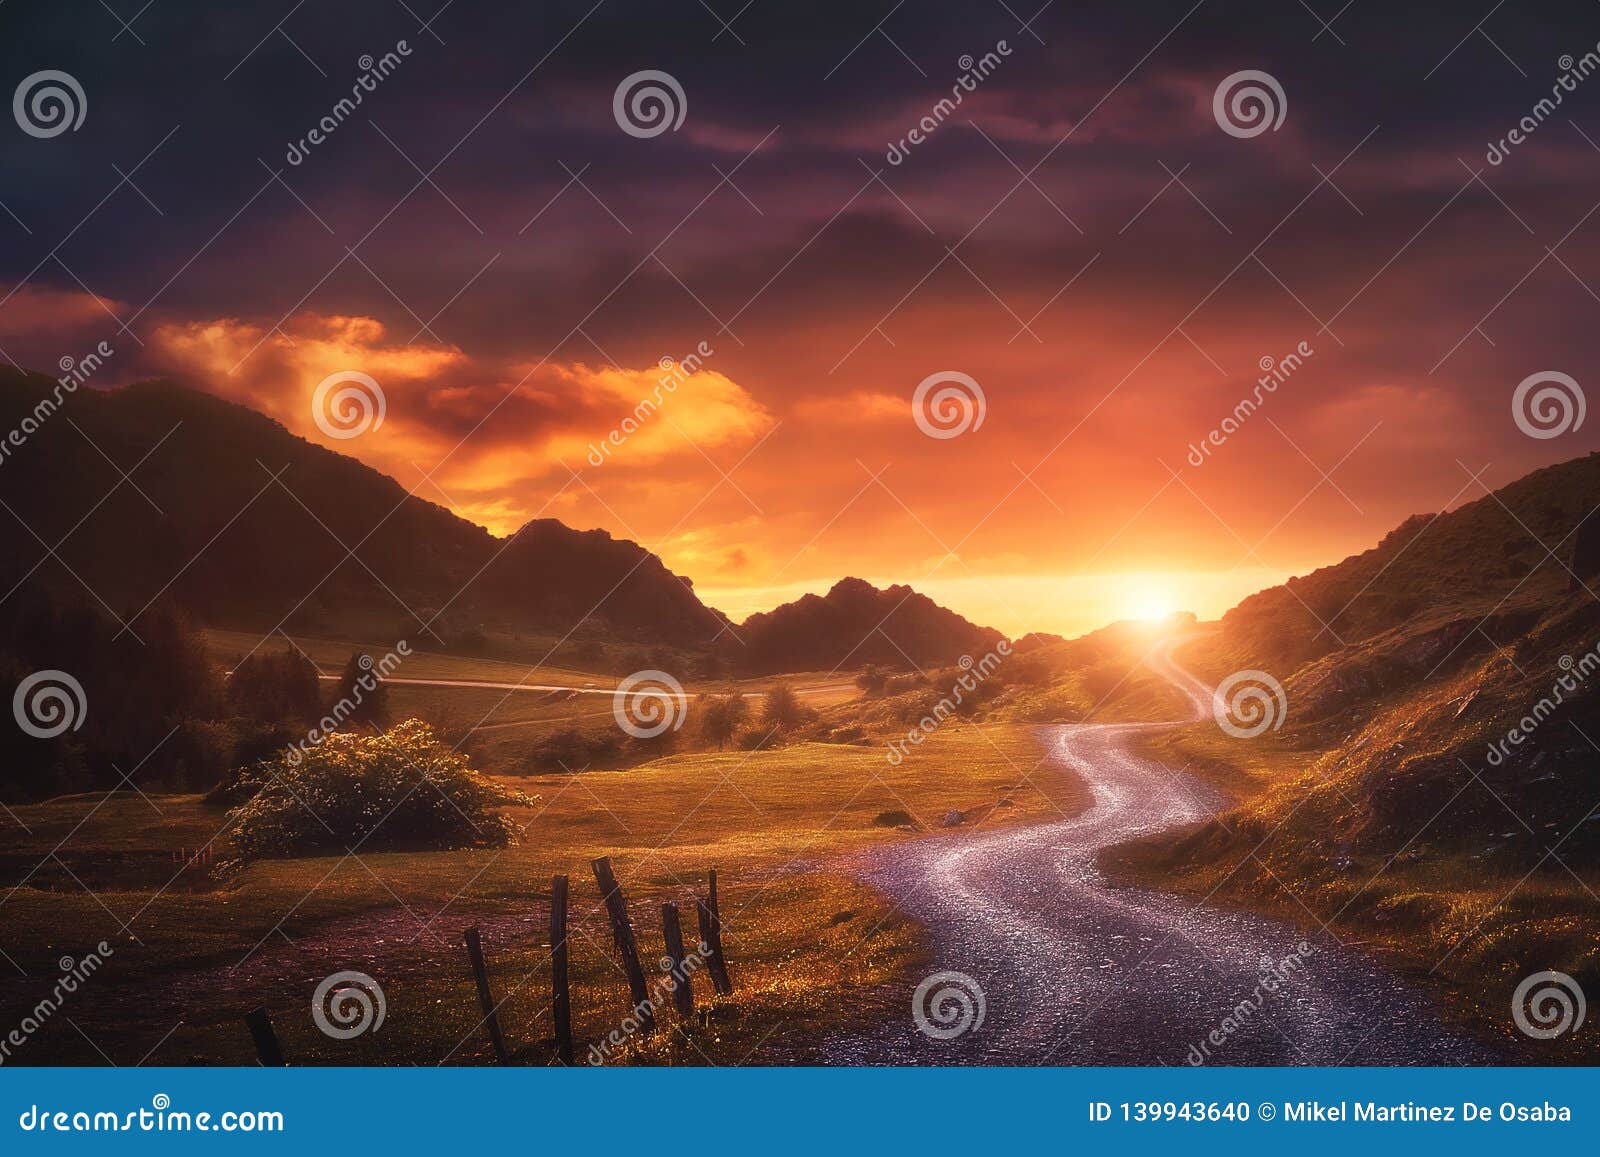 landscape background with path in urkiola at sunset